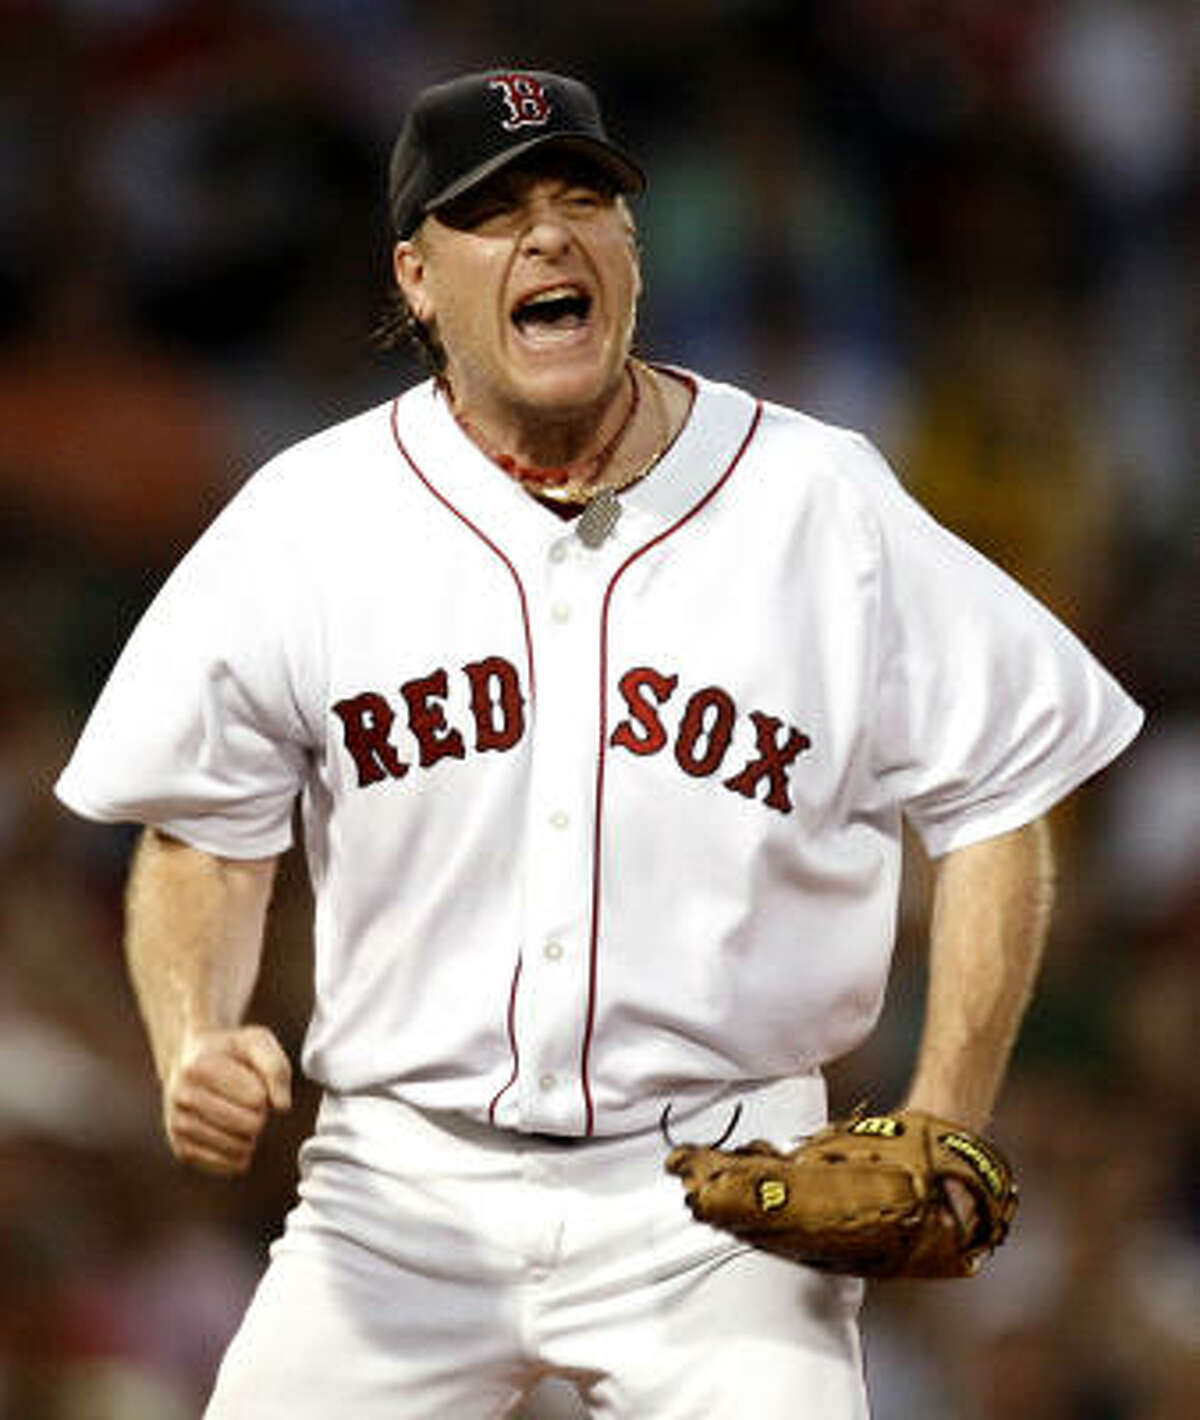 Curt Schilling, P, 1991 Like Kenny Lofton, Schilling's lone season with the Astros came in 1991. He arrived in Houston from Baltimore via trade during the previous offseason and was used solely as a reliever, going 3-5 with a 3.81 ERA and eight saves in 56 appearances. In the offseason, the Astros traded Schilling to Philadelphia for Jason Grimsley, who never pitched a game for Houston. Schilling, on the other hand, was converted to a starter by the Phillies and pitched 16 more seasons with three other teams, finishing with a career record of 216-146 to go with 3,116 strikeouts, six All-Star selections, three 20-plus win seasons and three Cy Young runner-up finishes. He also won three World Series titles, the last coming in 2007 with the Boston Red Sox.